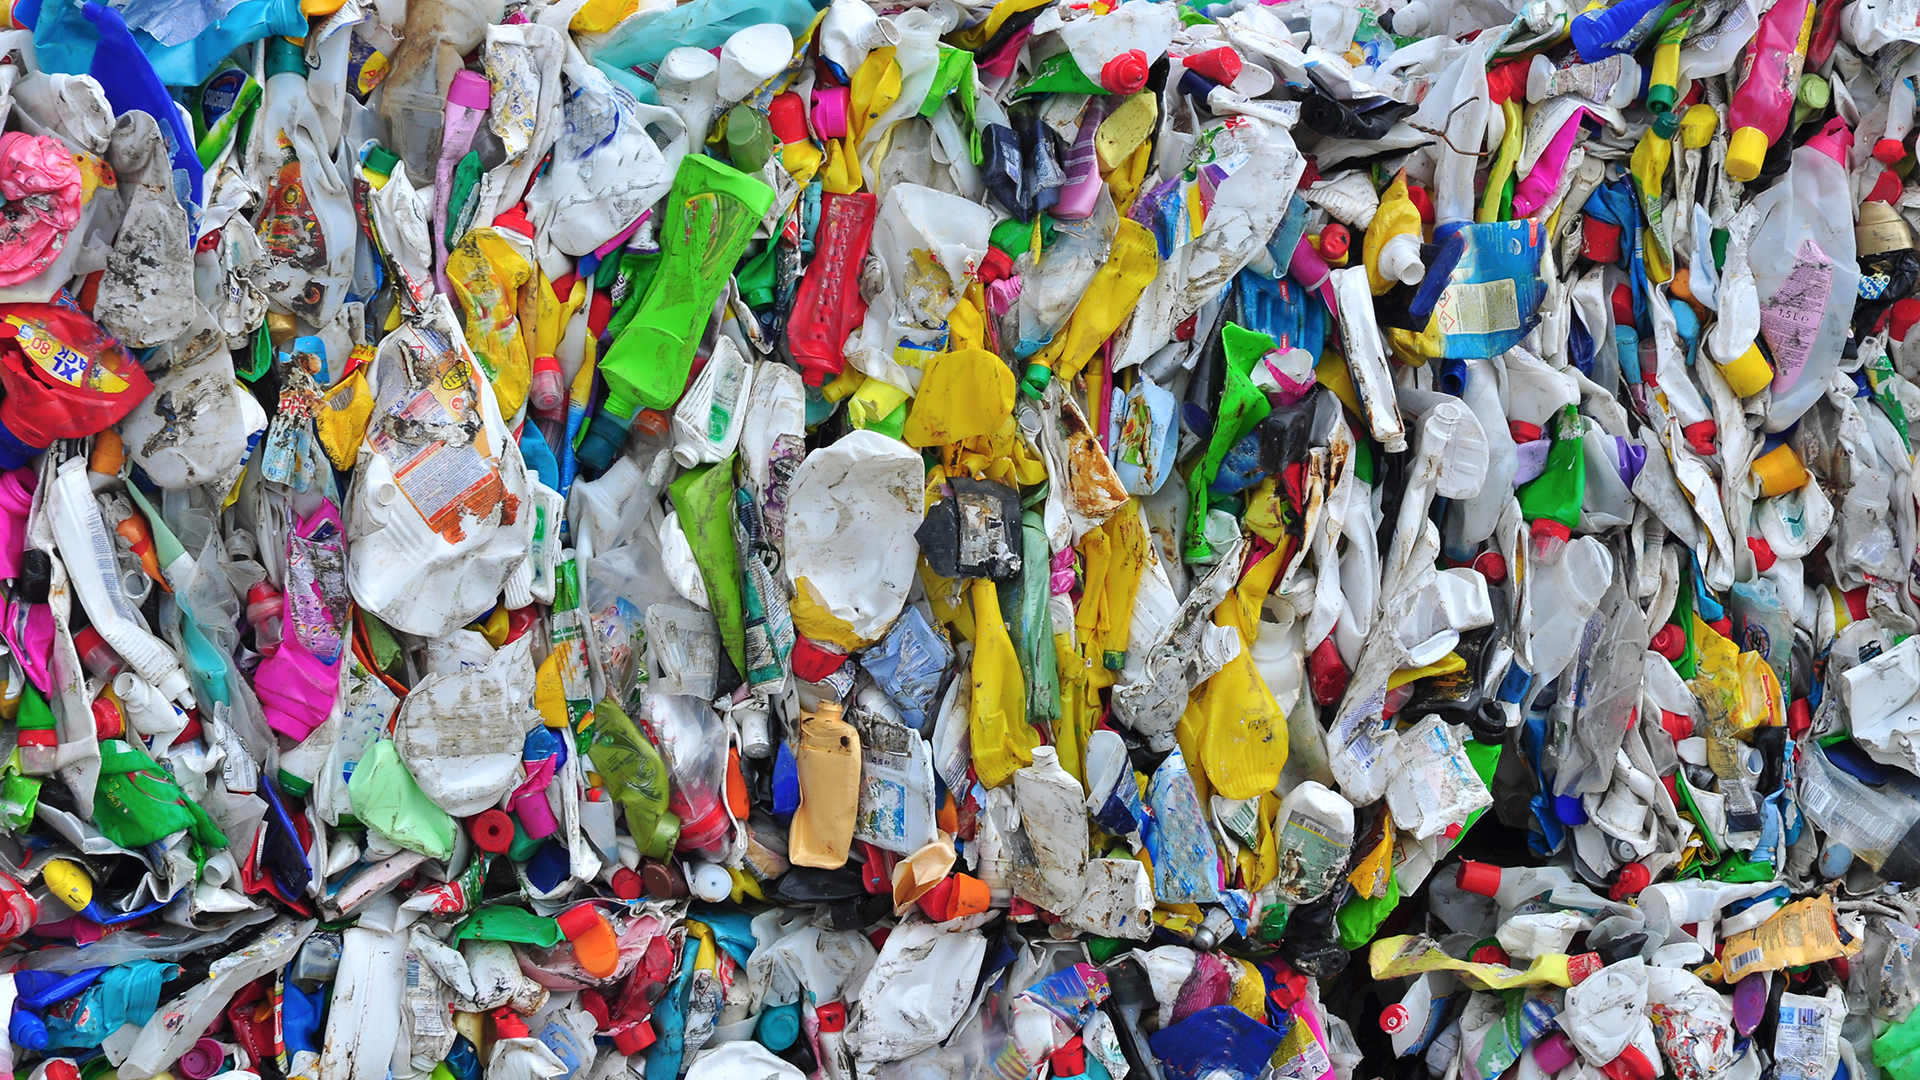 Plastics2Olefins project: Recycling plastic waste into high-value